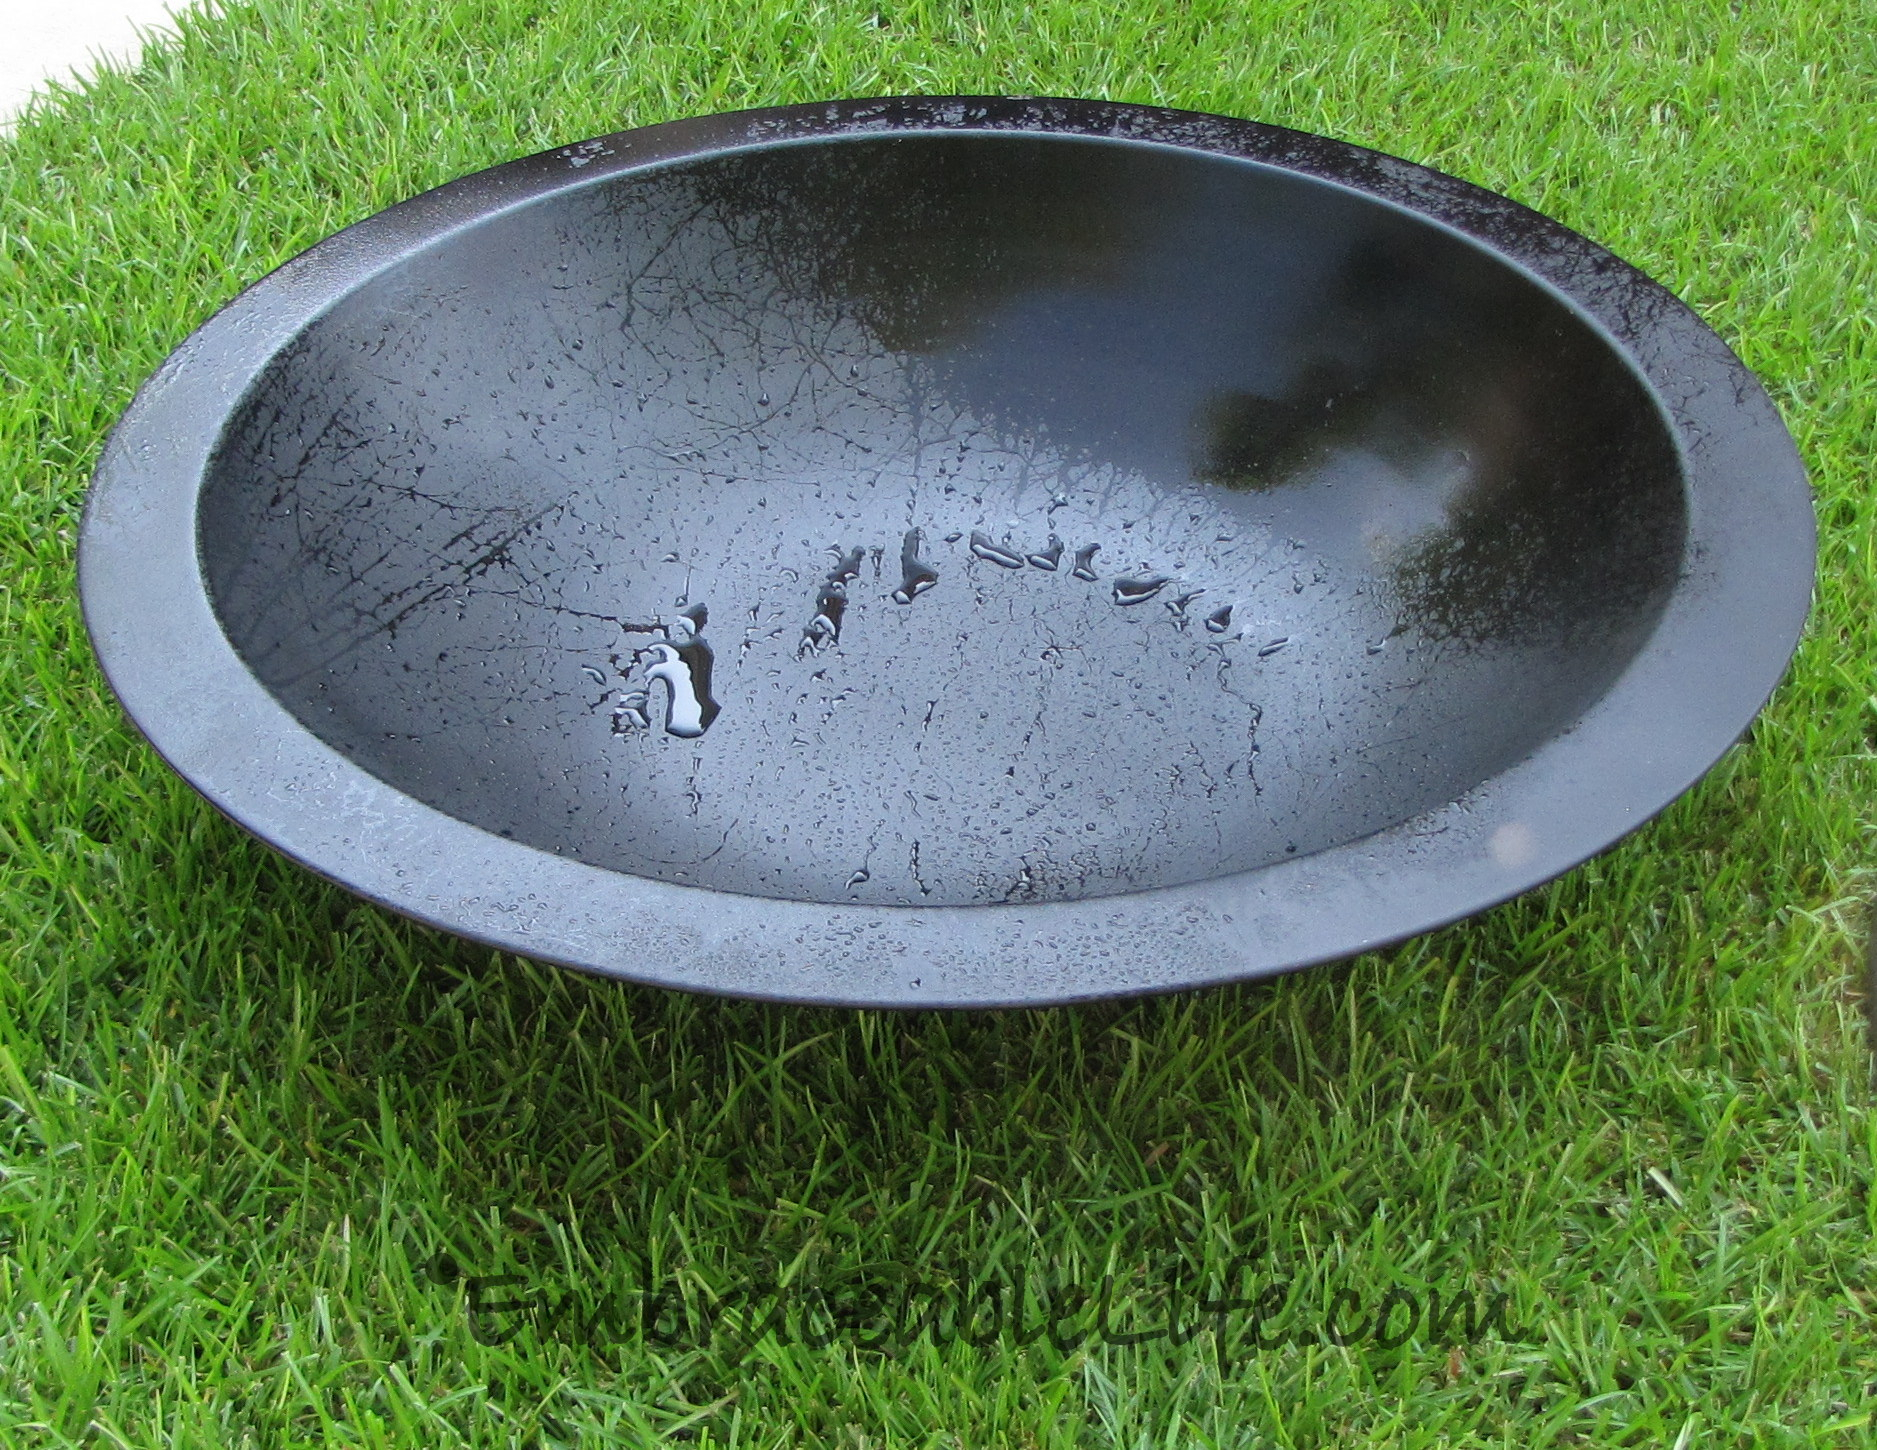 40 Steel Fire Pit Bowl Insert 013 Mccmatricschool with dimensions 1877 X 1450